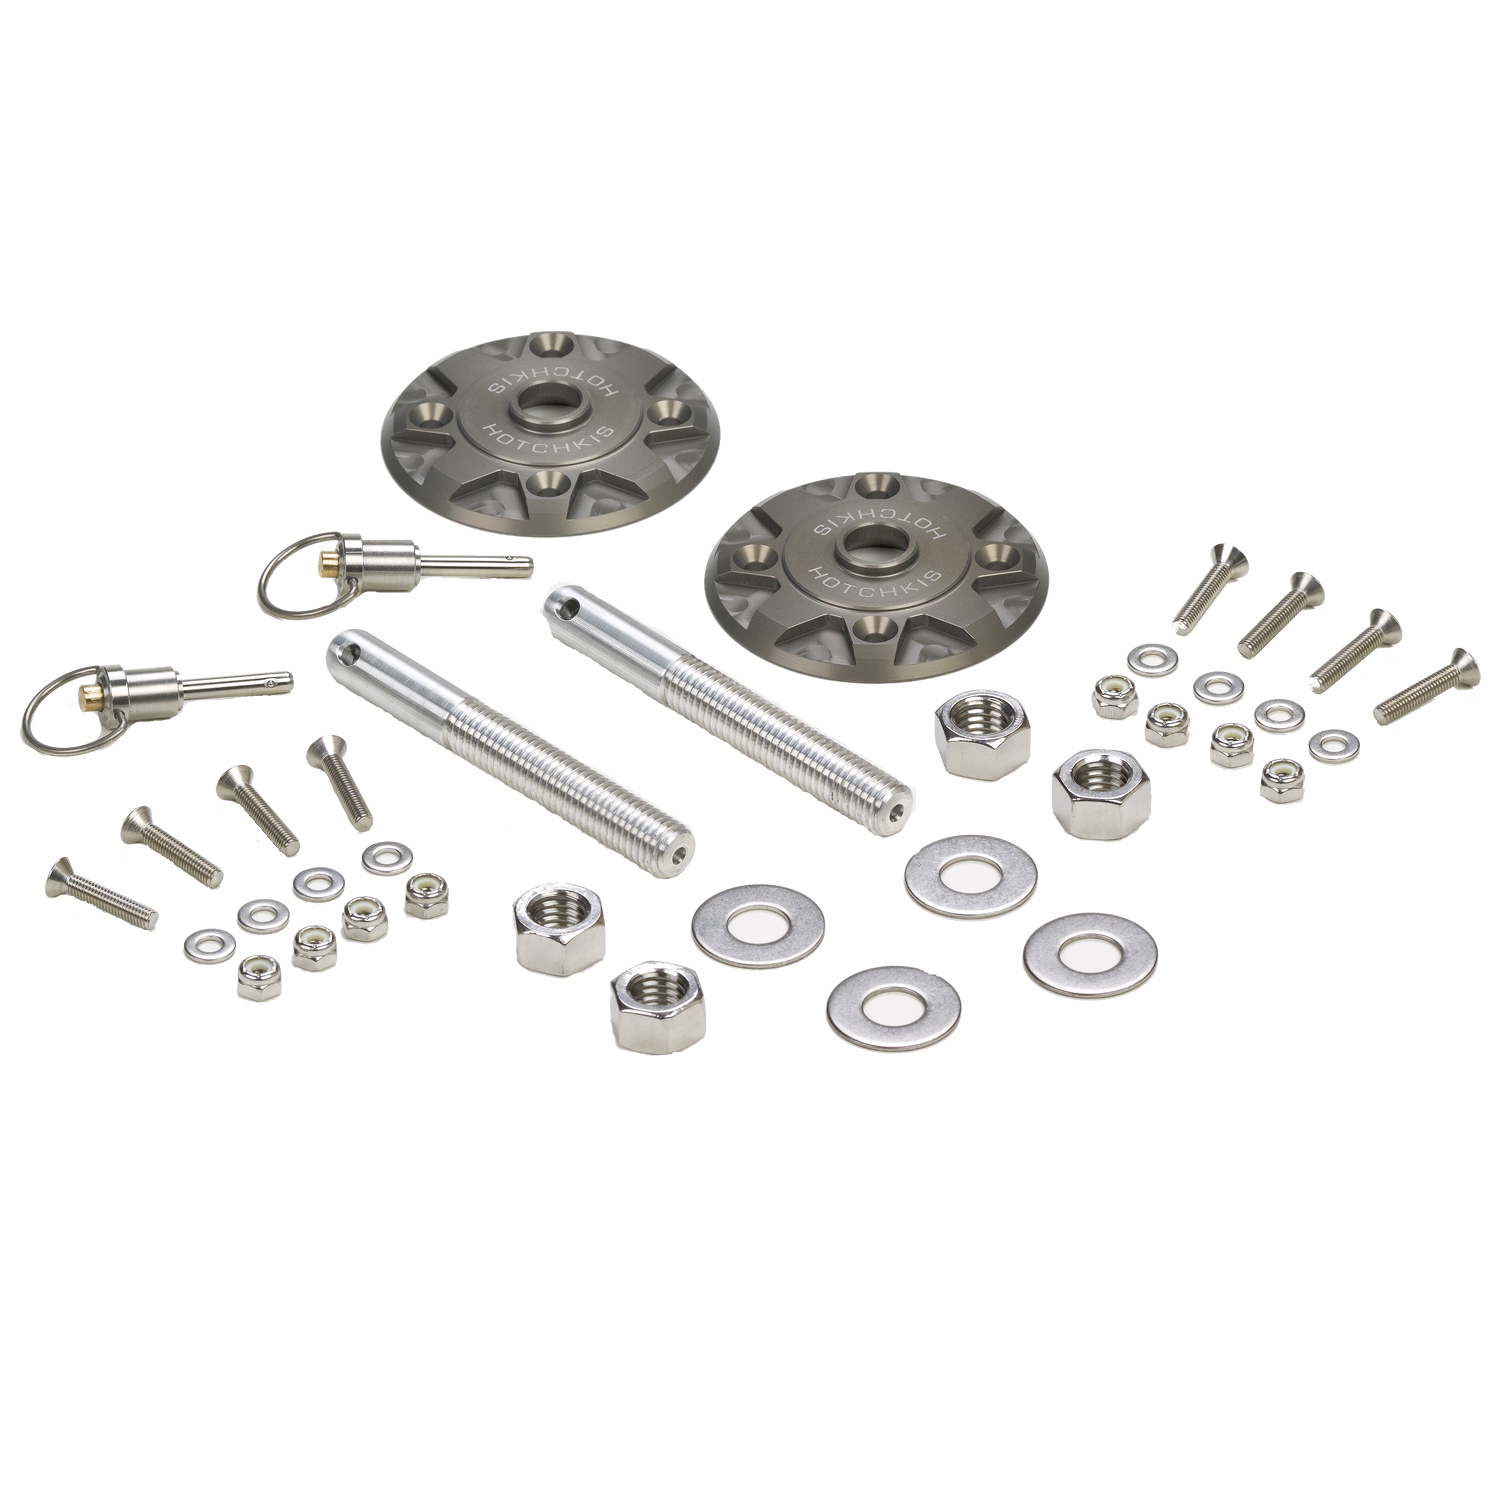 Quick Release Billet Hood Pin Kit from Hotchkis Sport Suspension